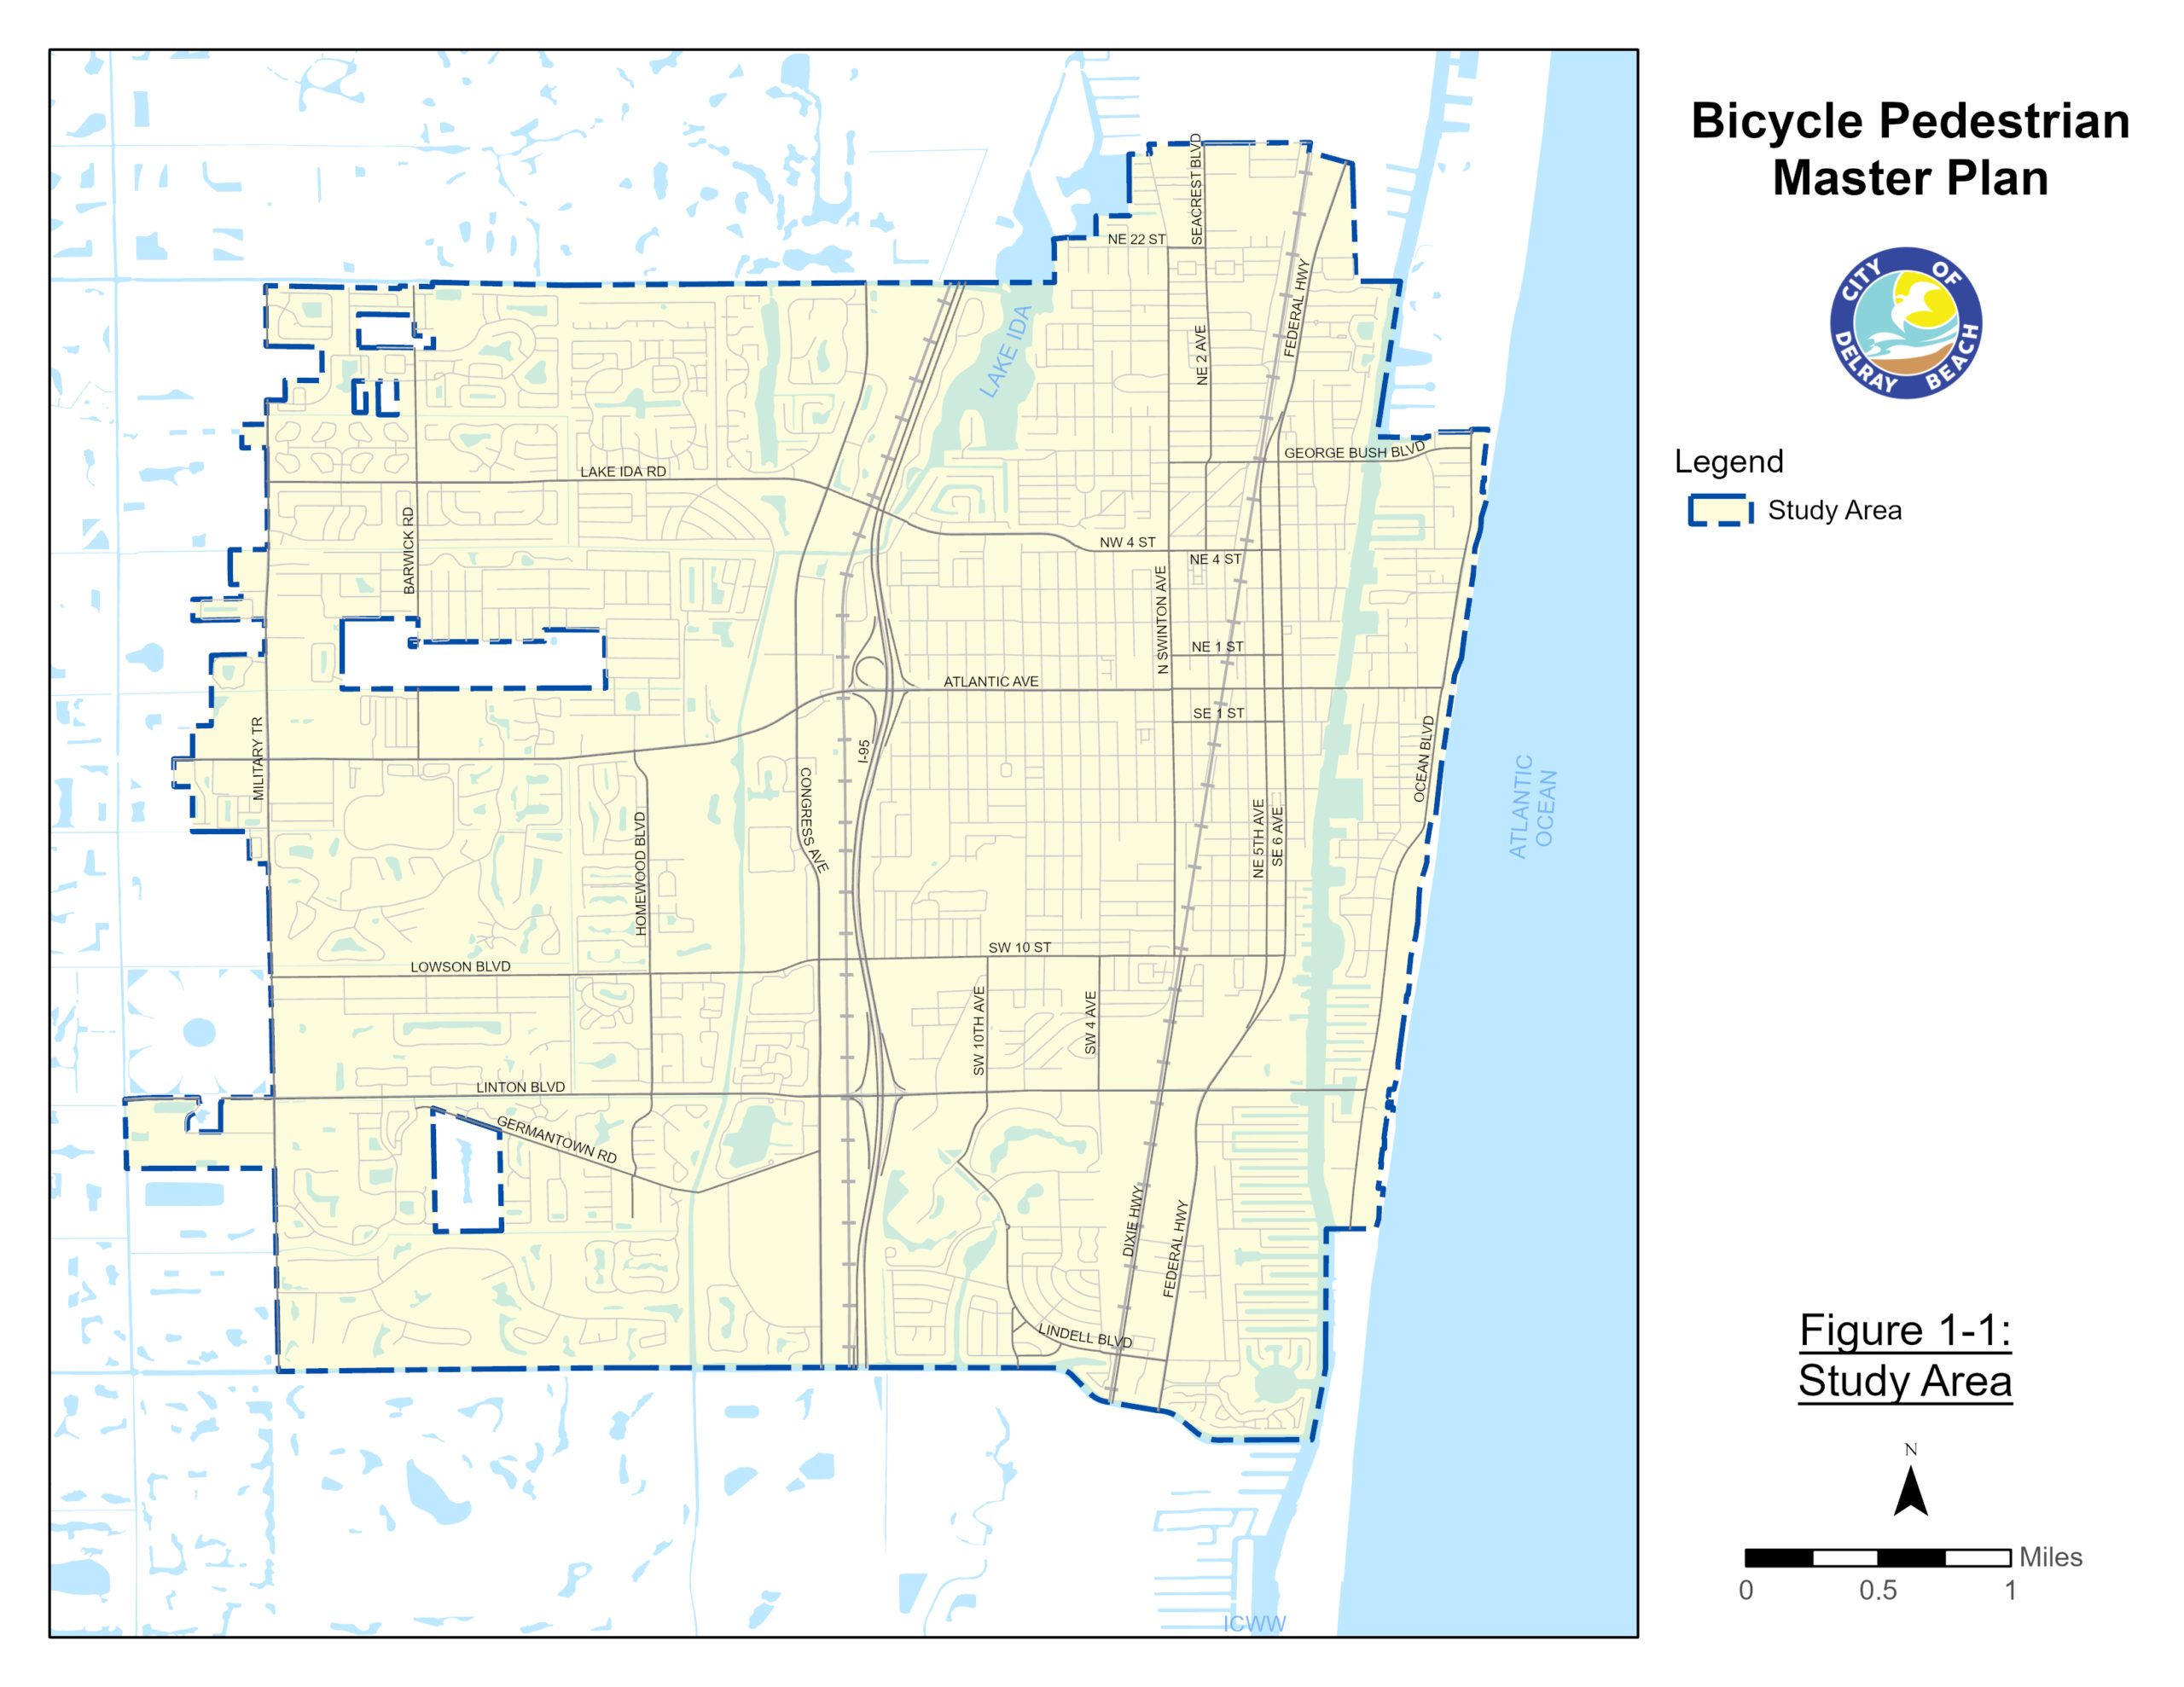 An illustration of the geographic boundaries of the City of Delray Beach, Florida